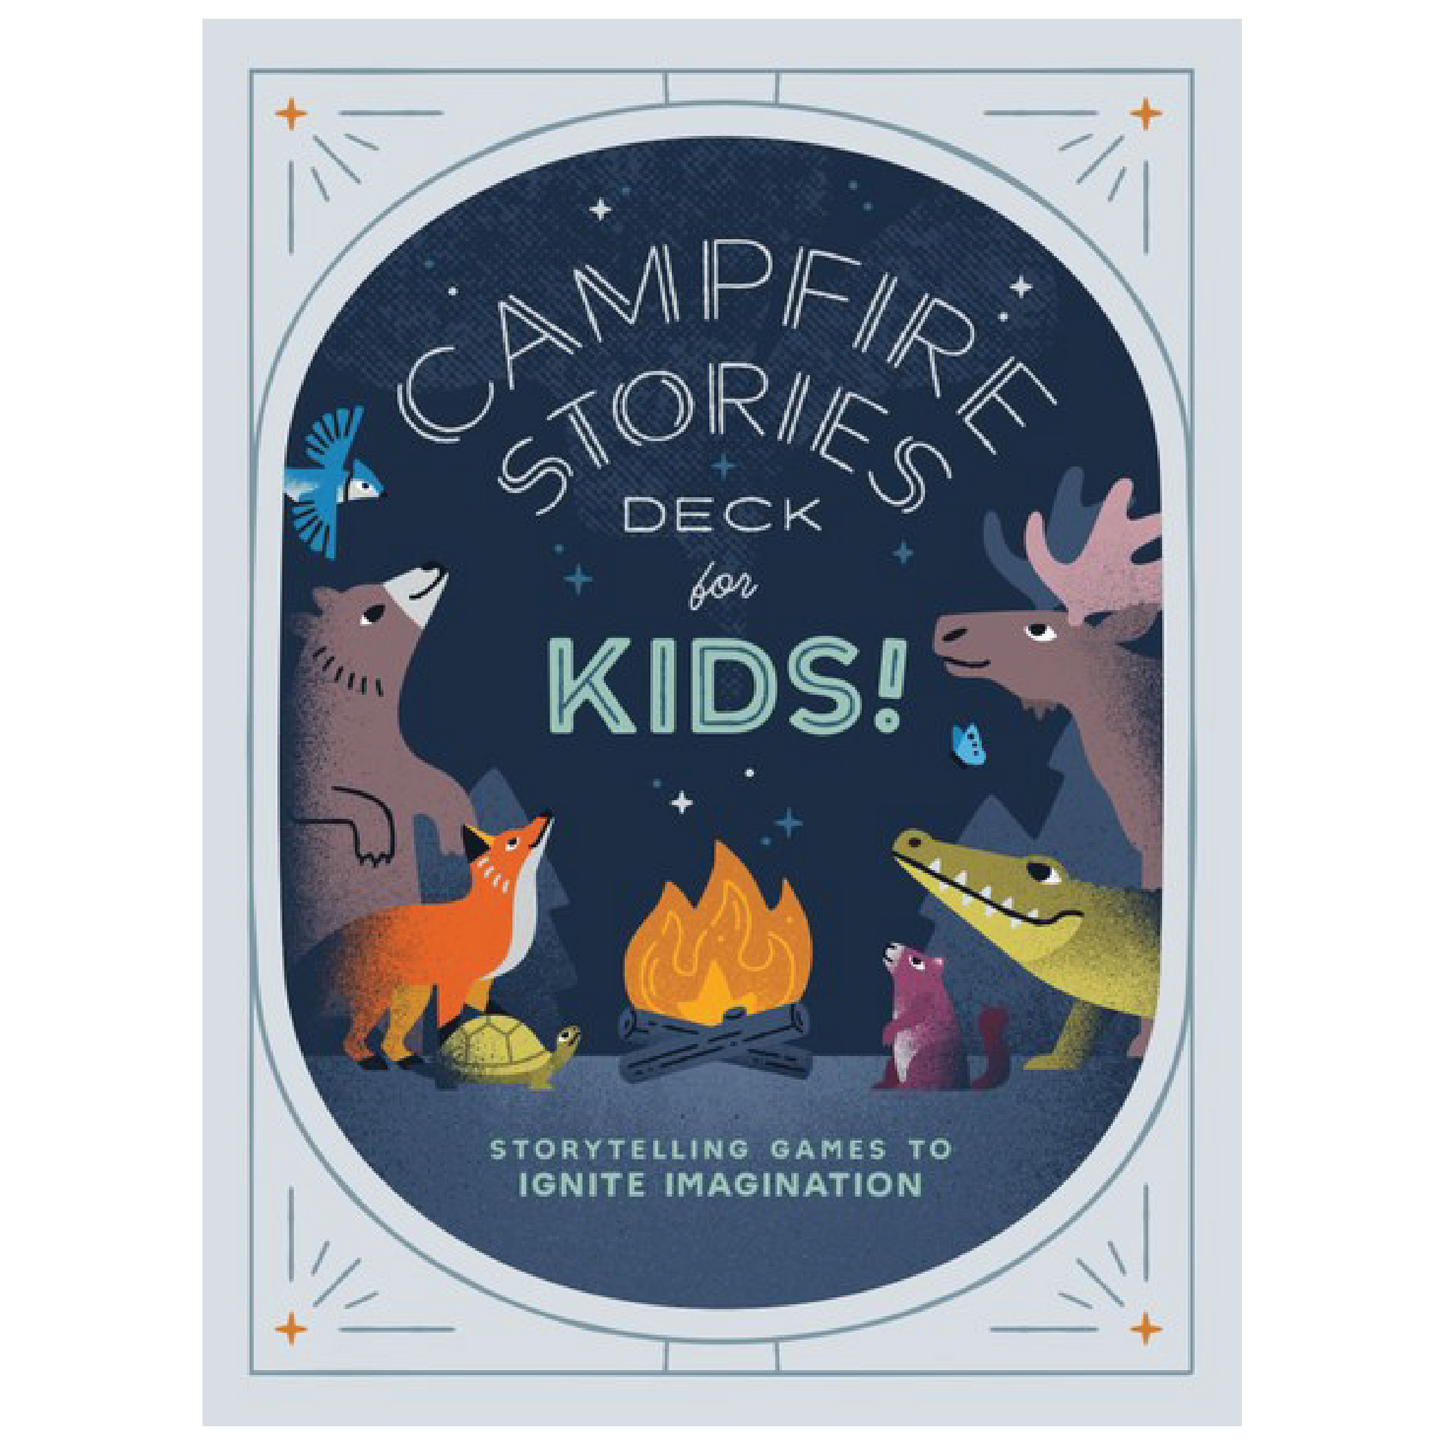 Campfire Stories Deck of Cards - For Kids!